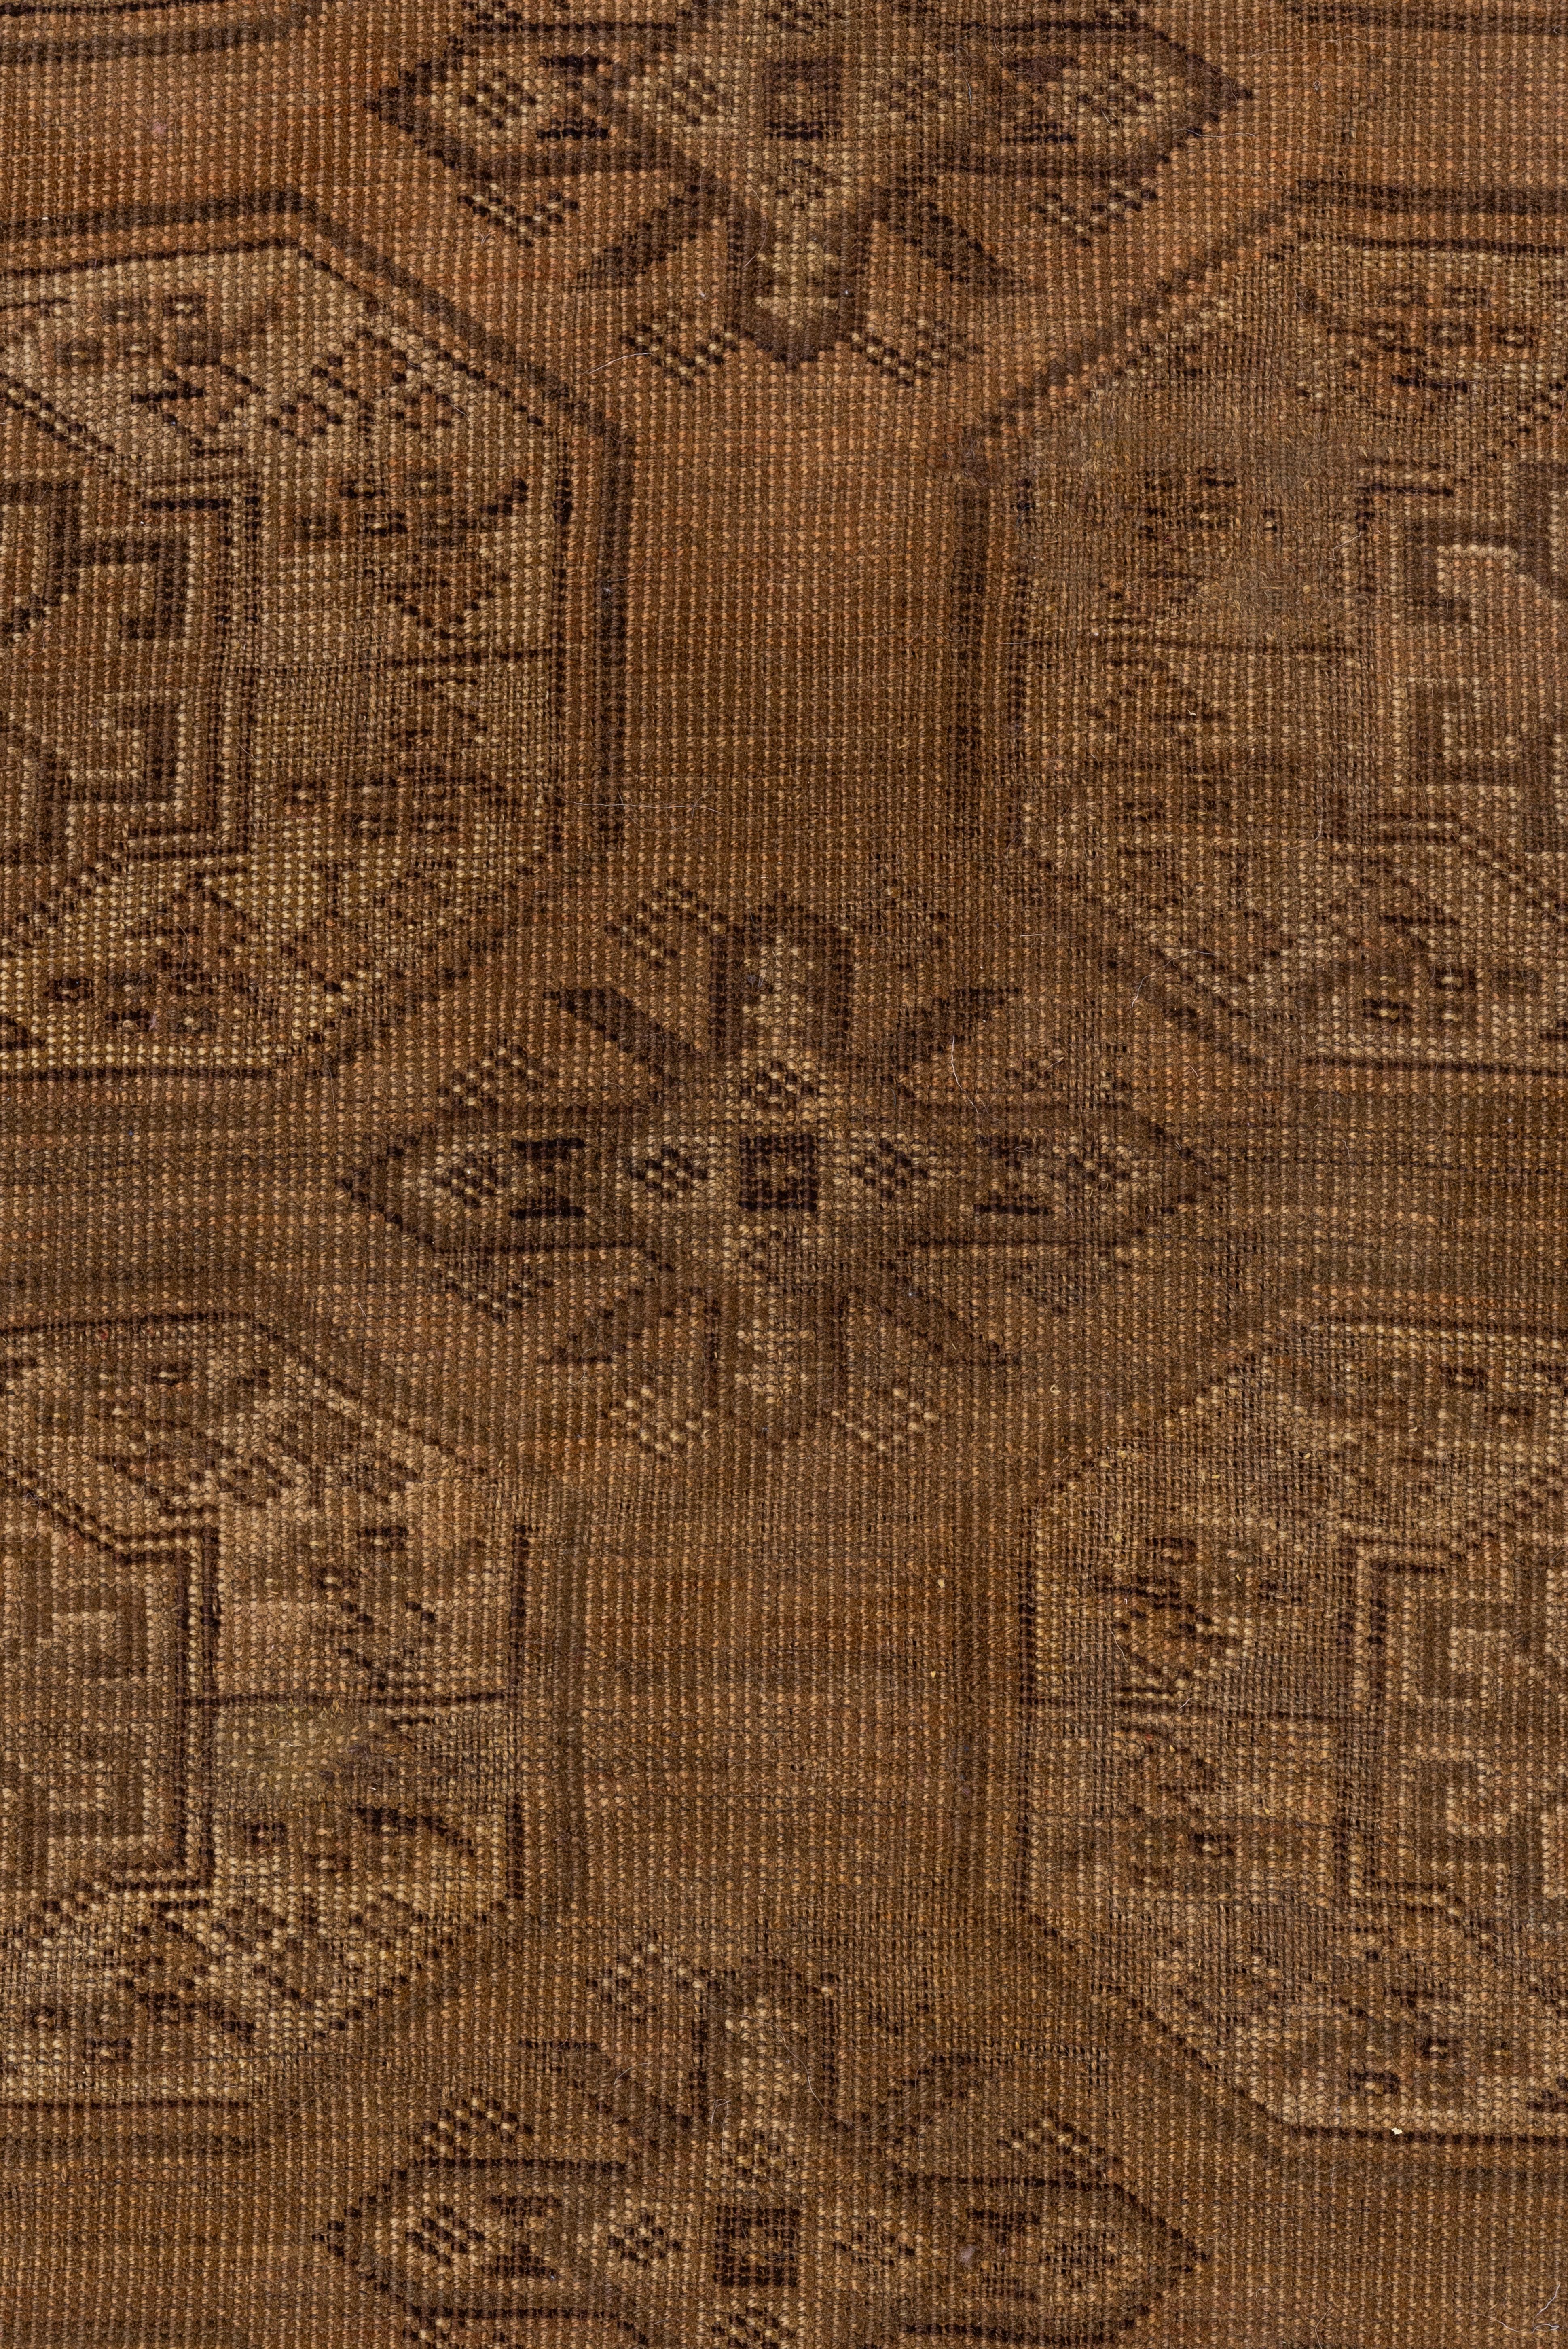 Hand-Knotted Tone on Tone Antique Afghan Ersari Rug, circa 1940s For Sale